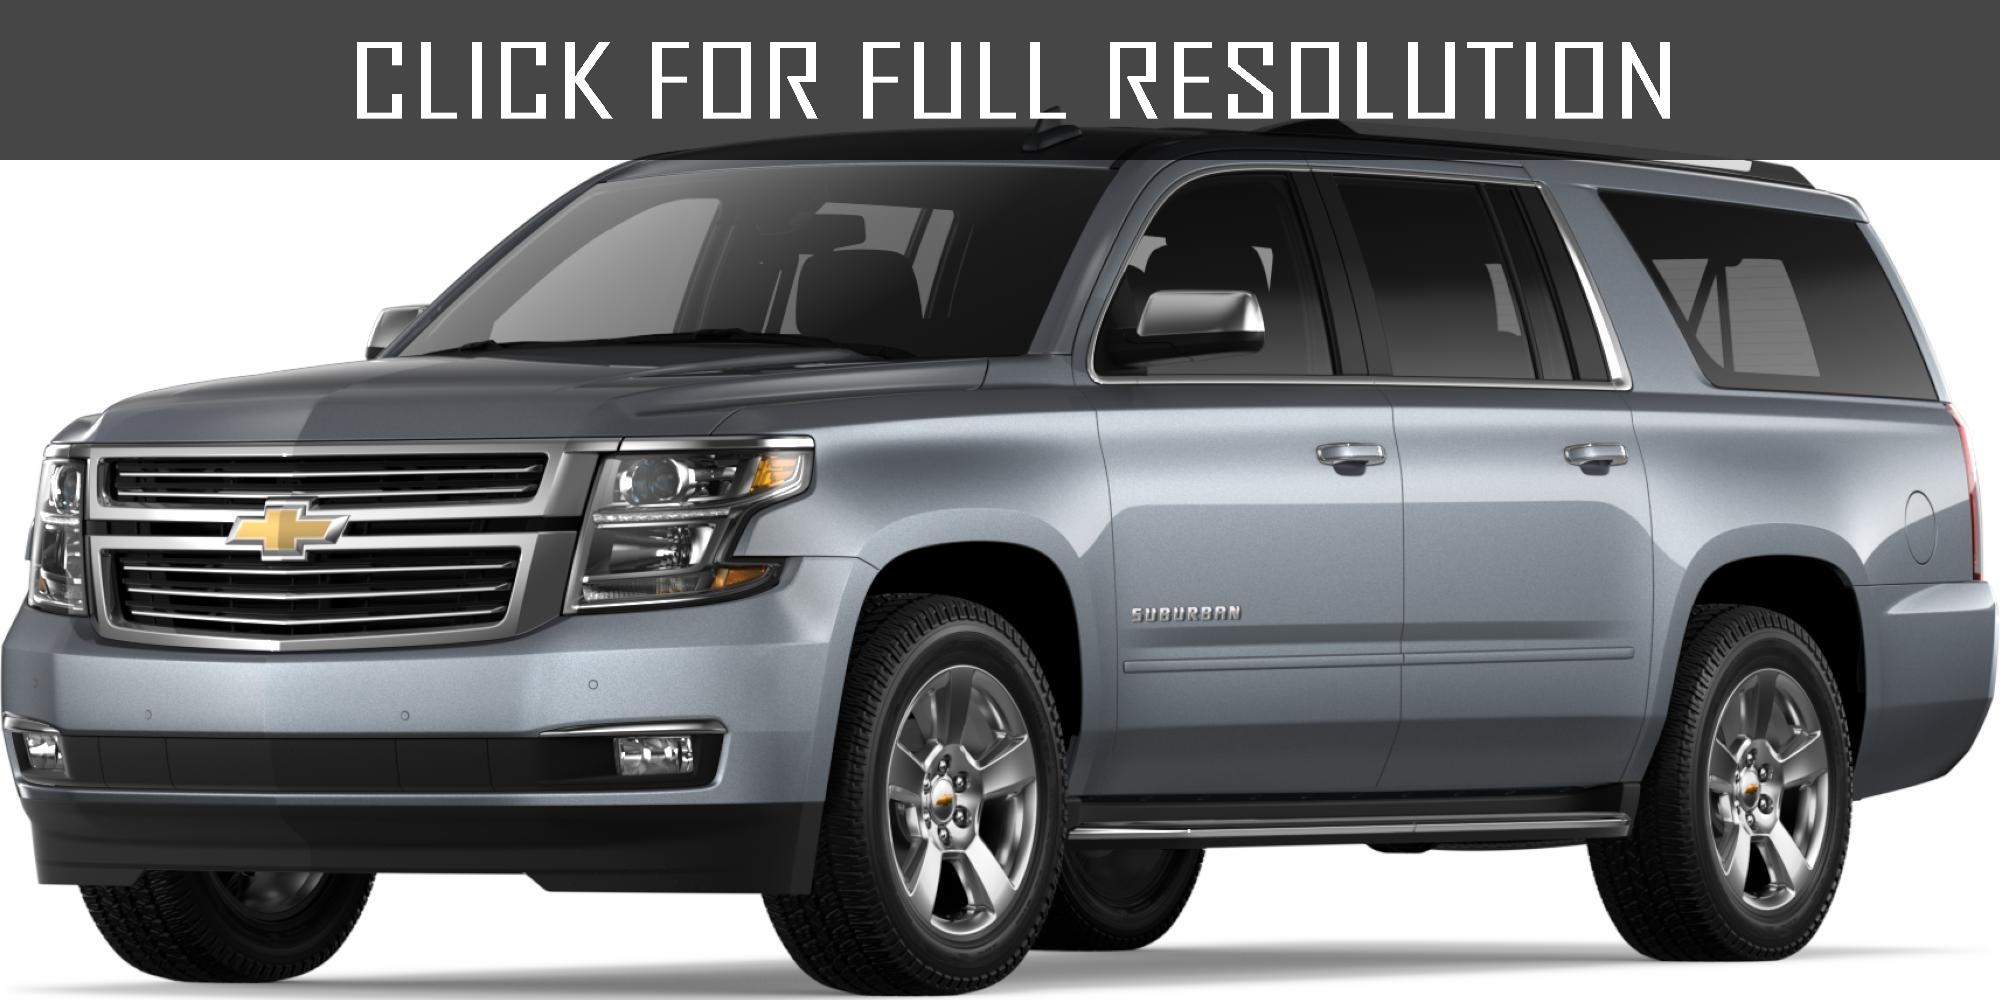 Chevrolet Suburban V8 amazing photo gallery, some information and